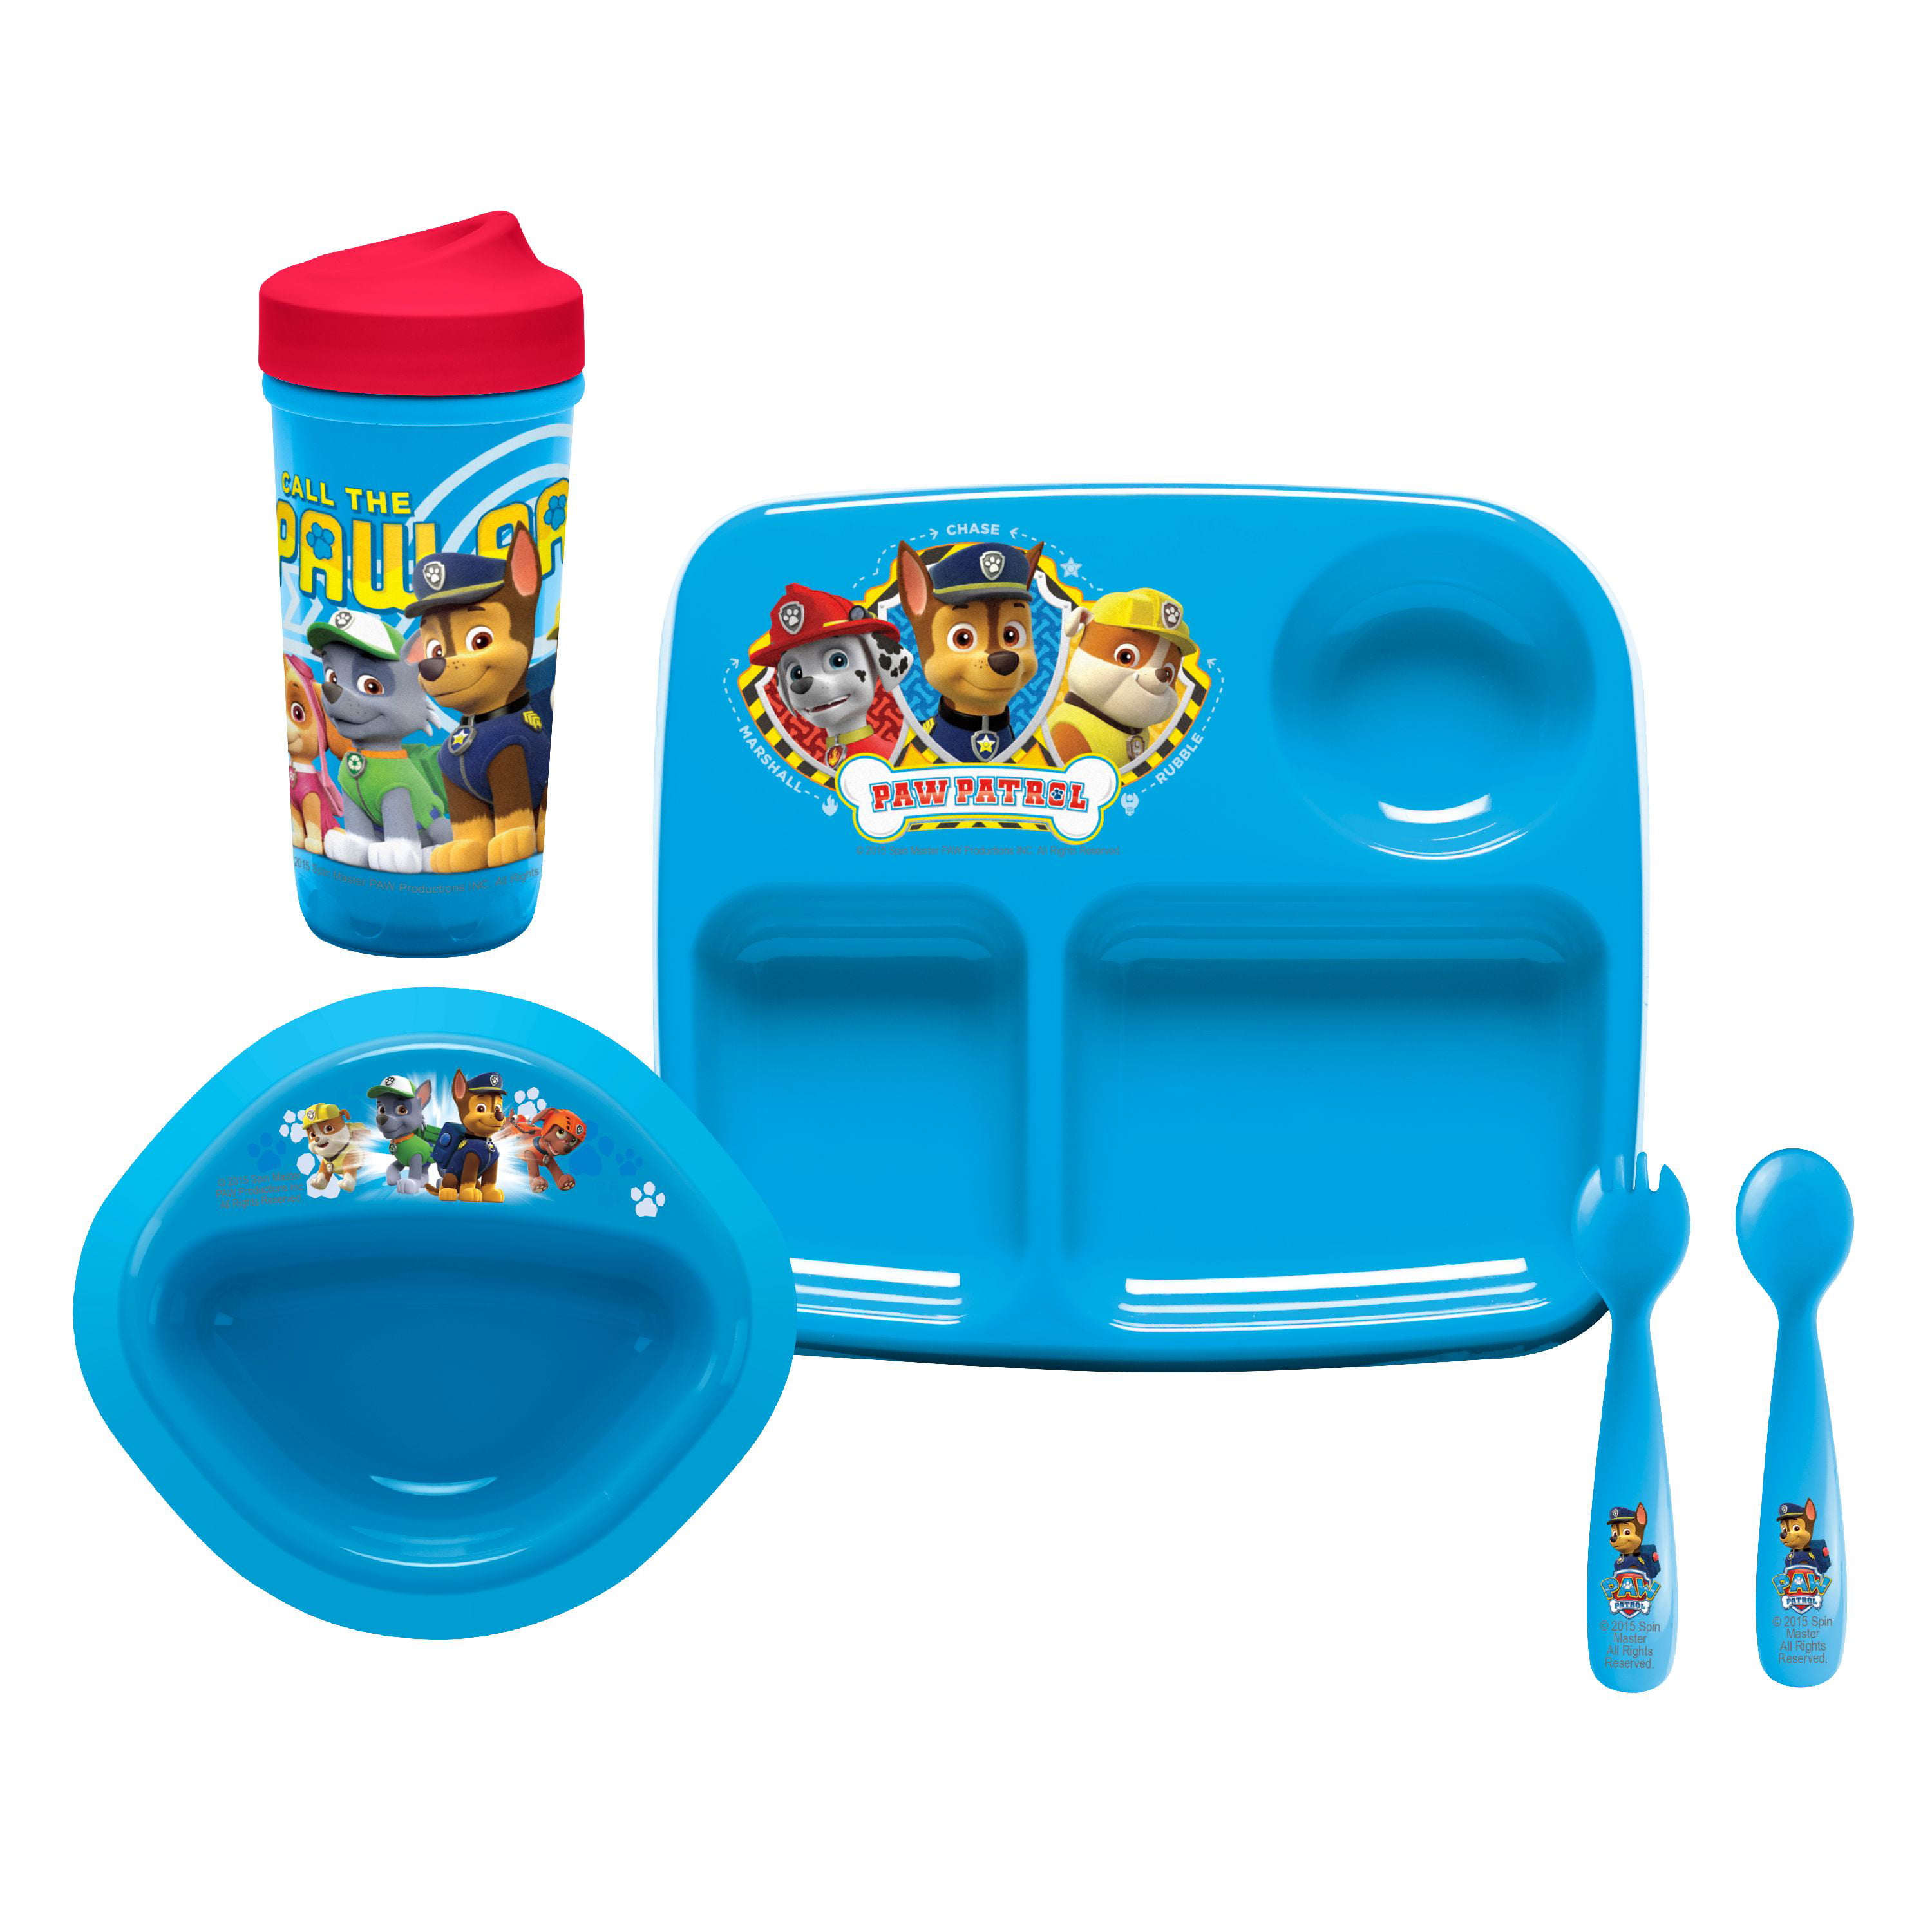 Zak Designs PAW Patrol Chase and Rubble Easy-Grip Flatware with